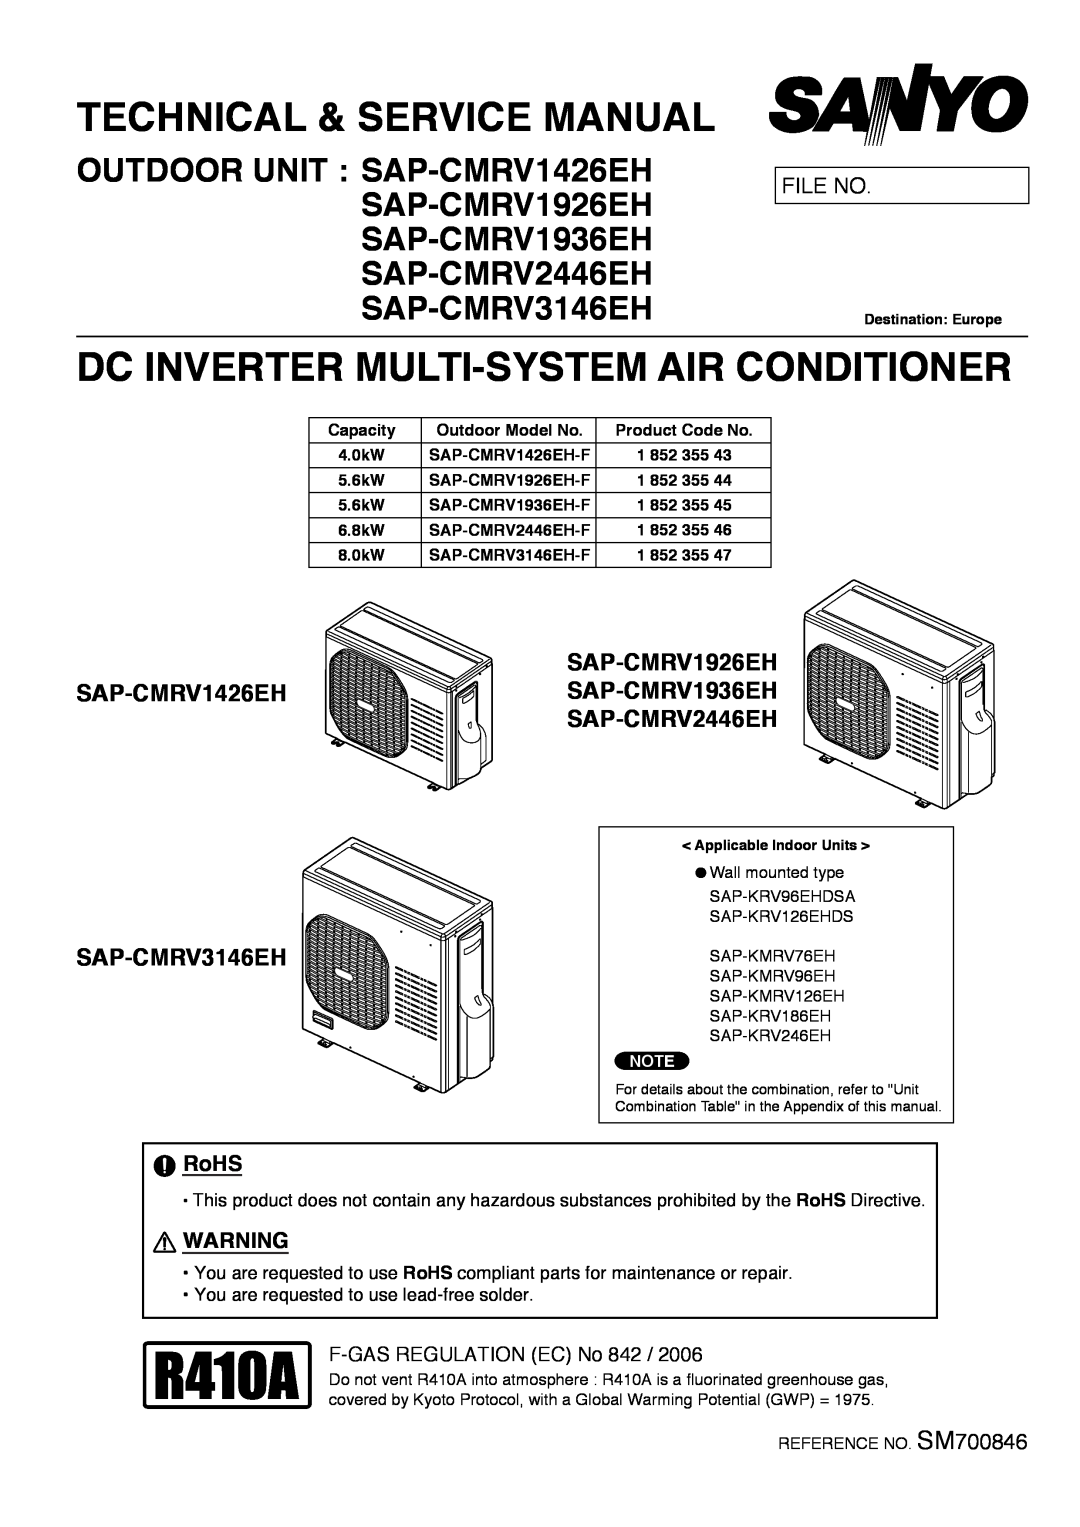 Sanyo SAP-CMRV1926EH service manual File No, Technical & Service Manual, Dc Inverter Multi-Systemair Conditioner 